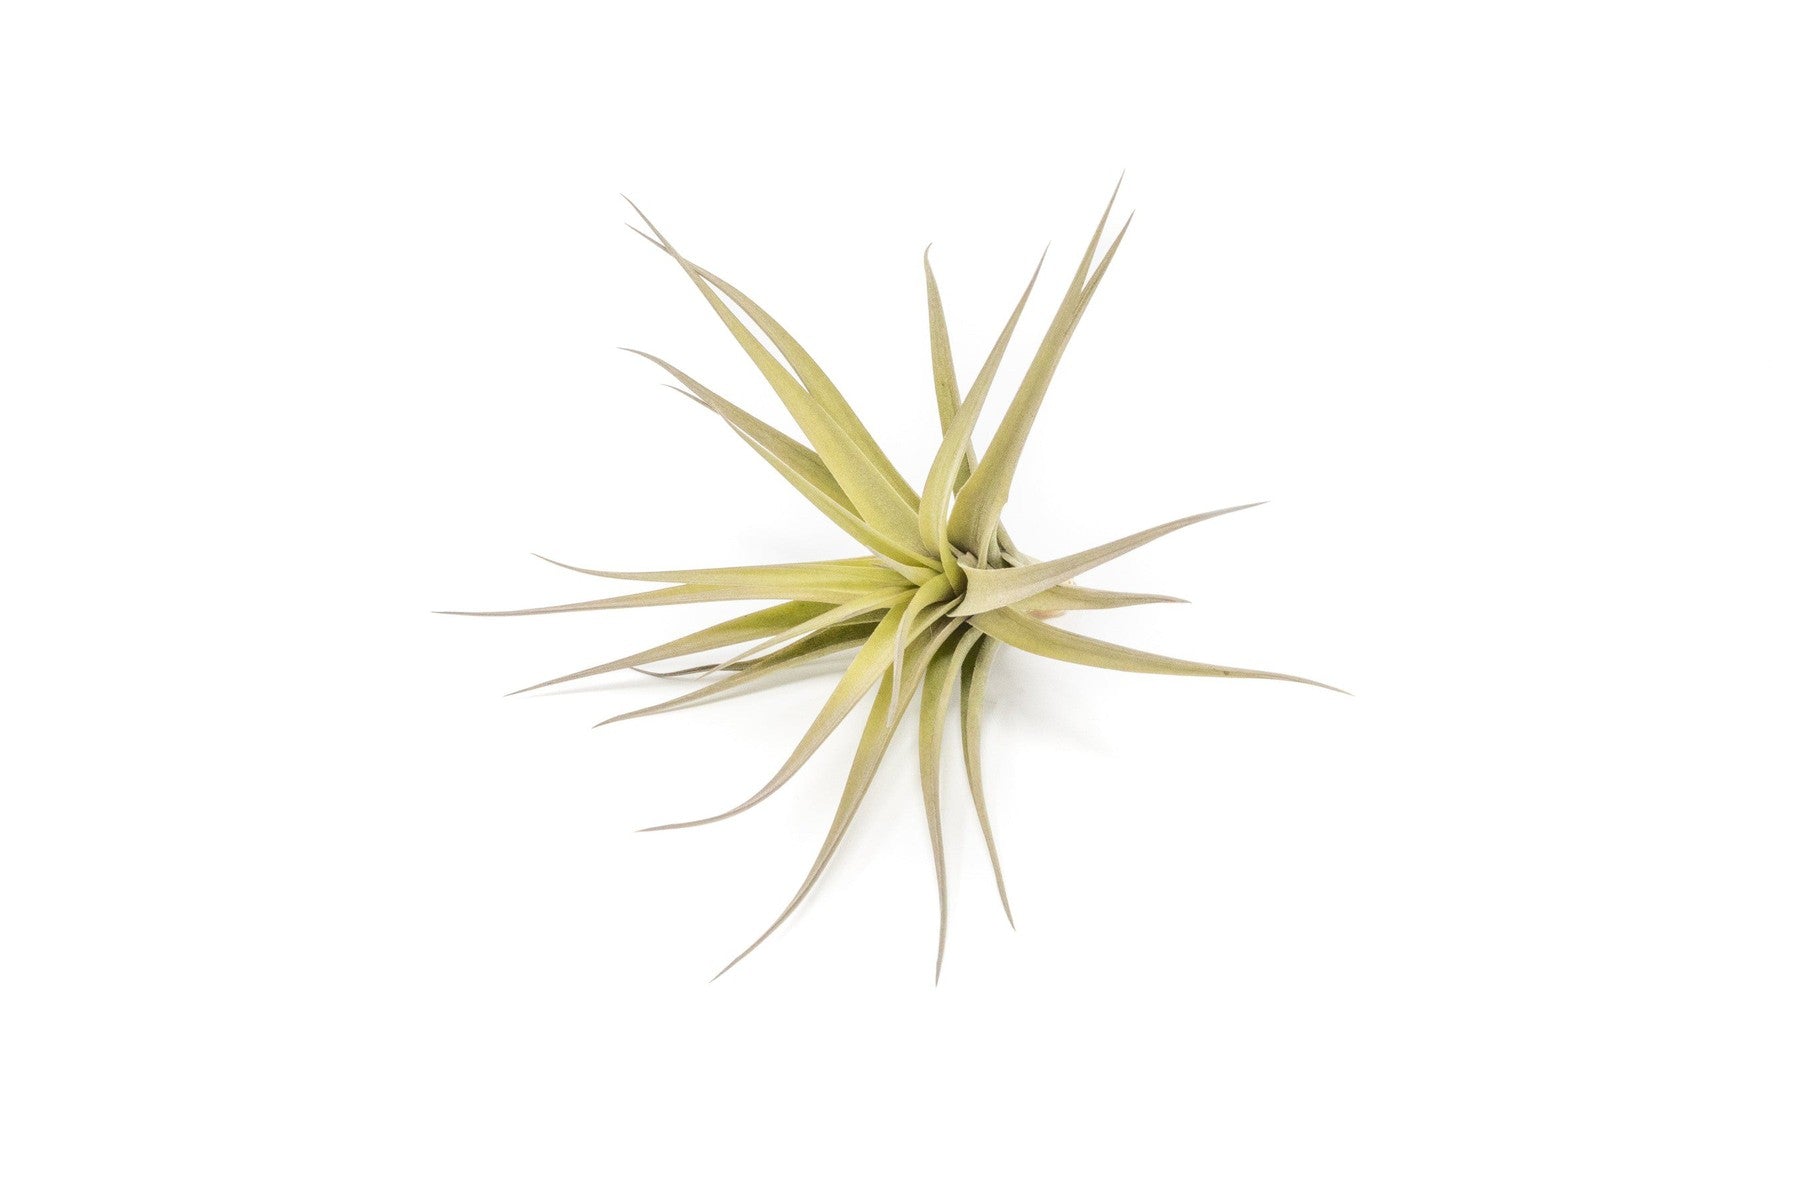 SALE - Tillandsia Aeranthos - Clavel del Aire - "Carnation of the Air" Air Plants-airplant-The Succulent Source